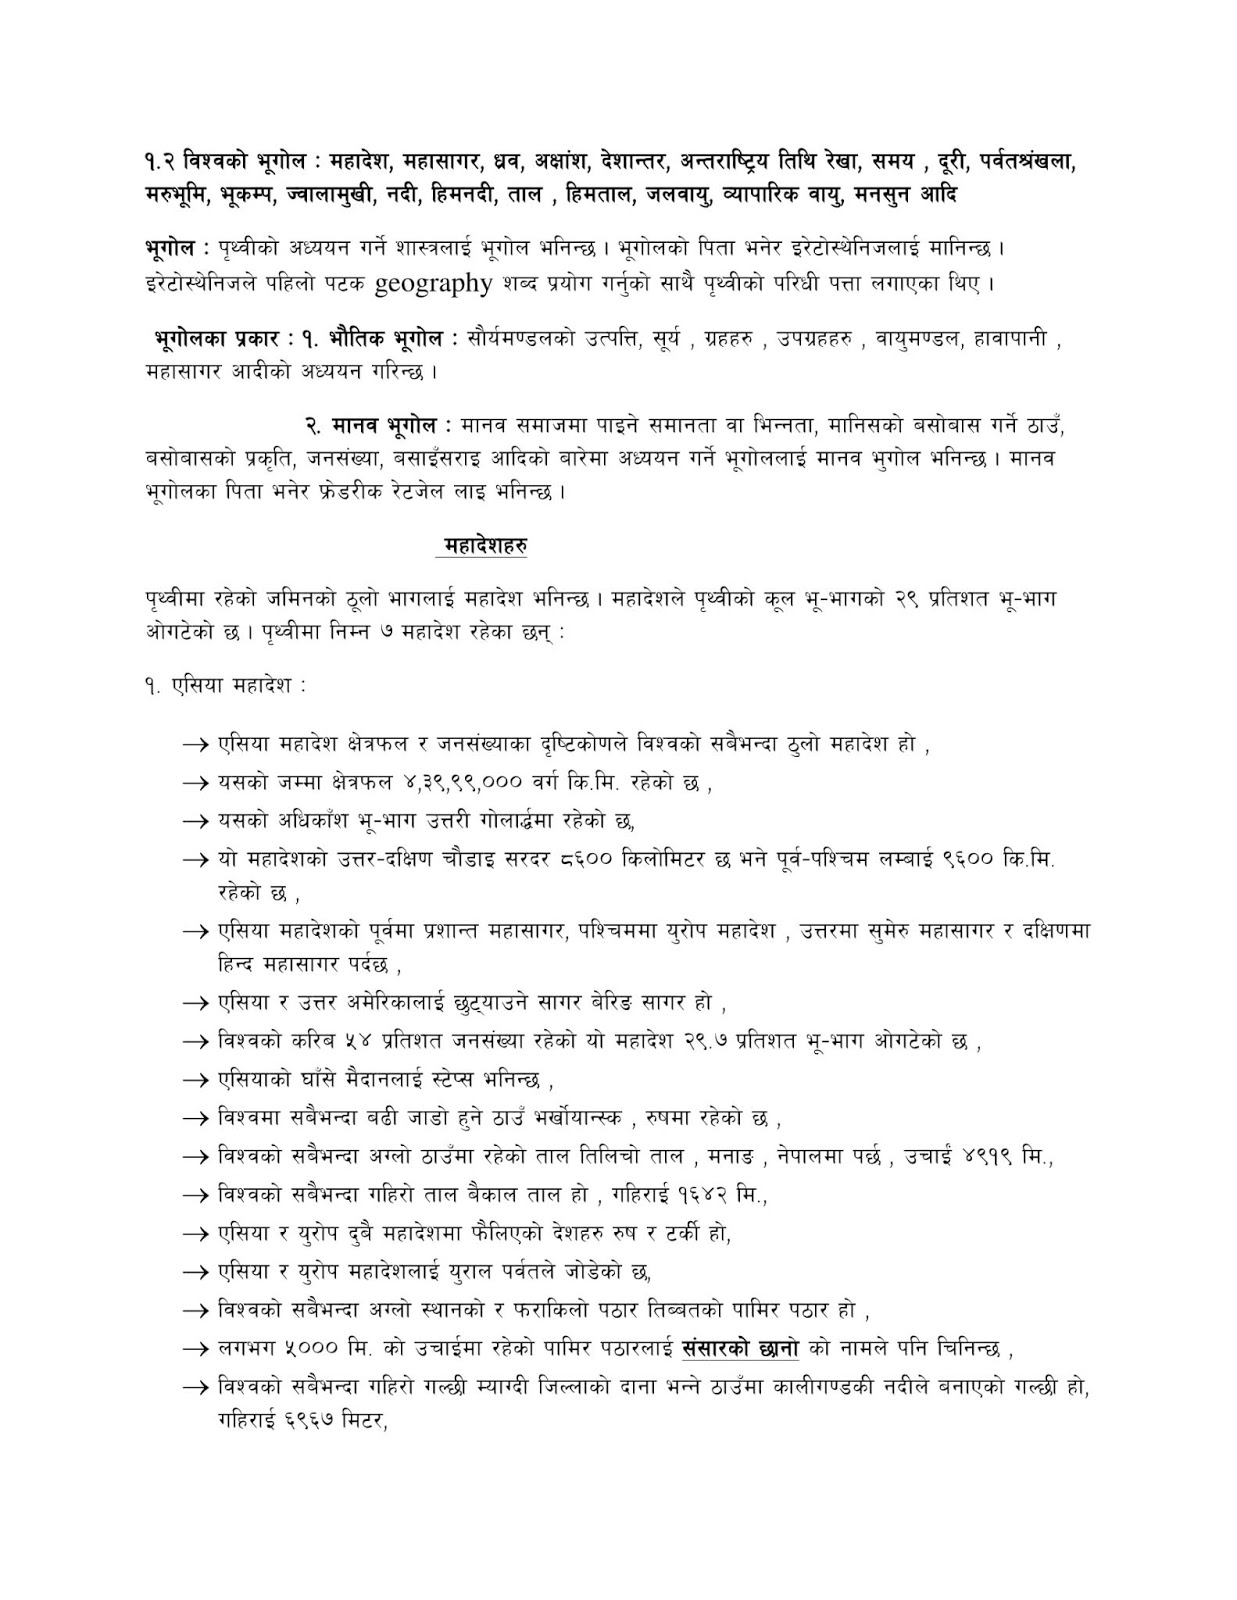 World Geography - Bishwo Bhugol - विश्व भूगोल Important Notes For All